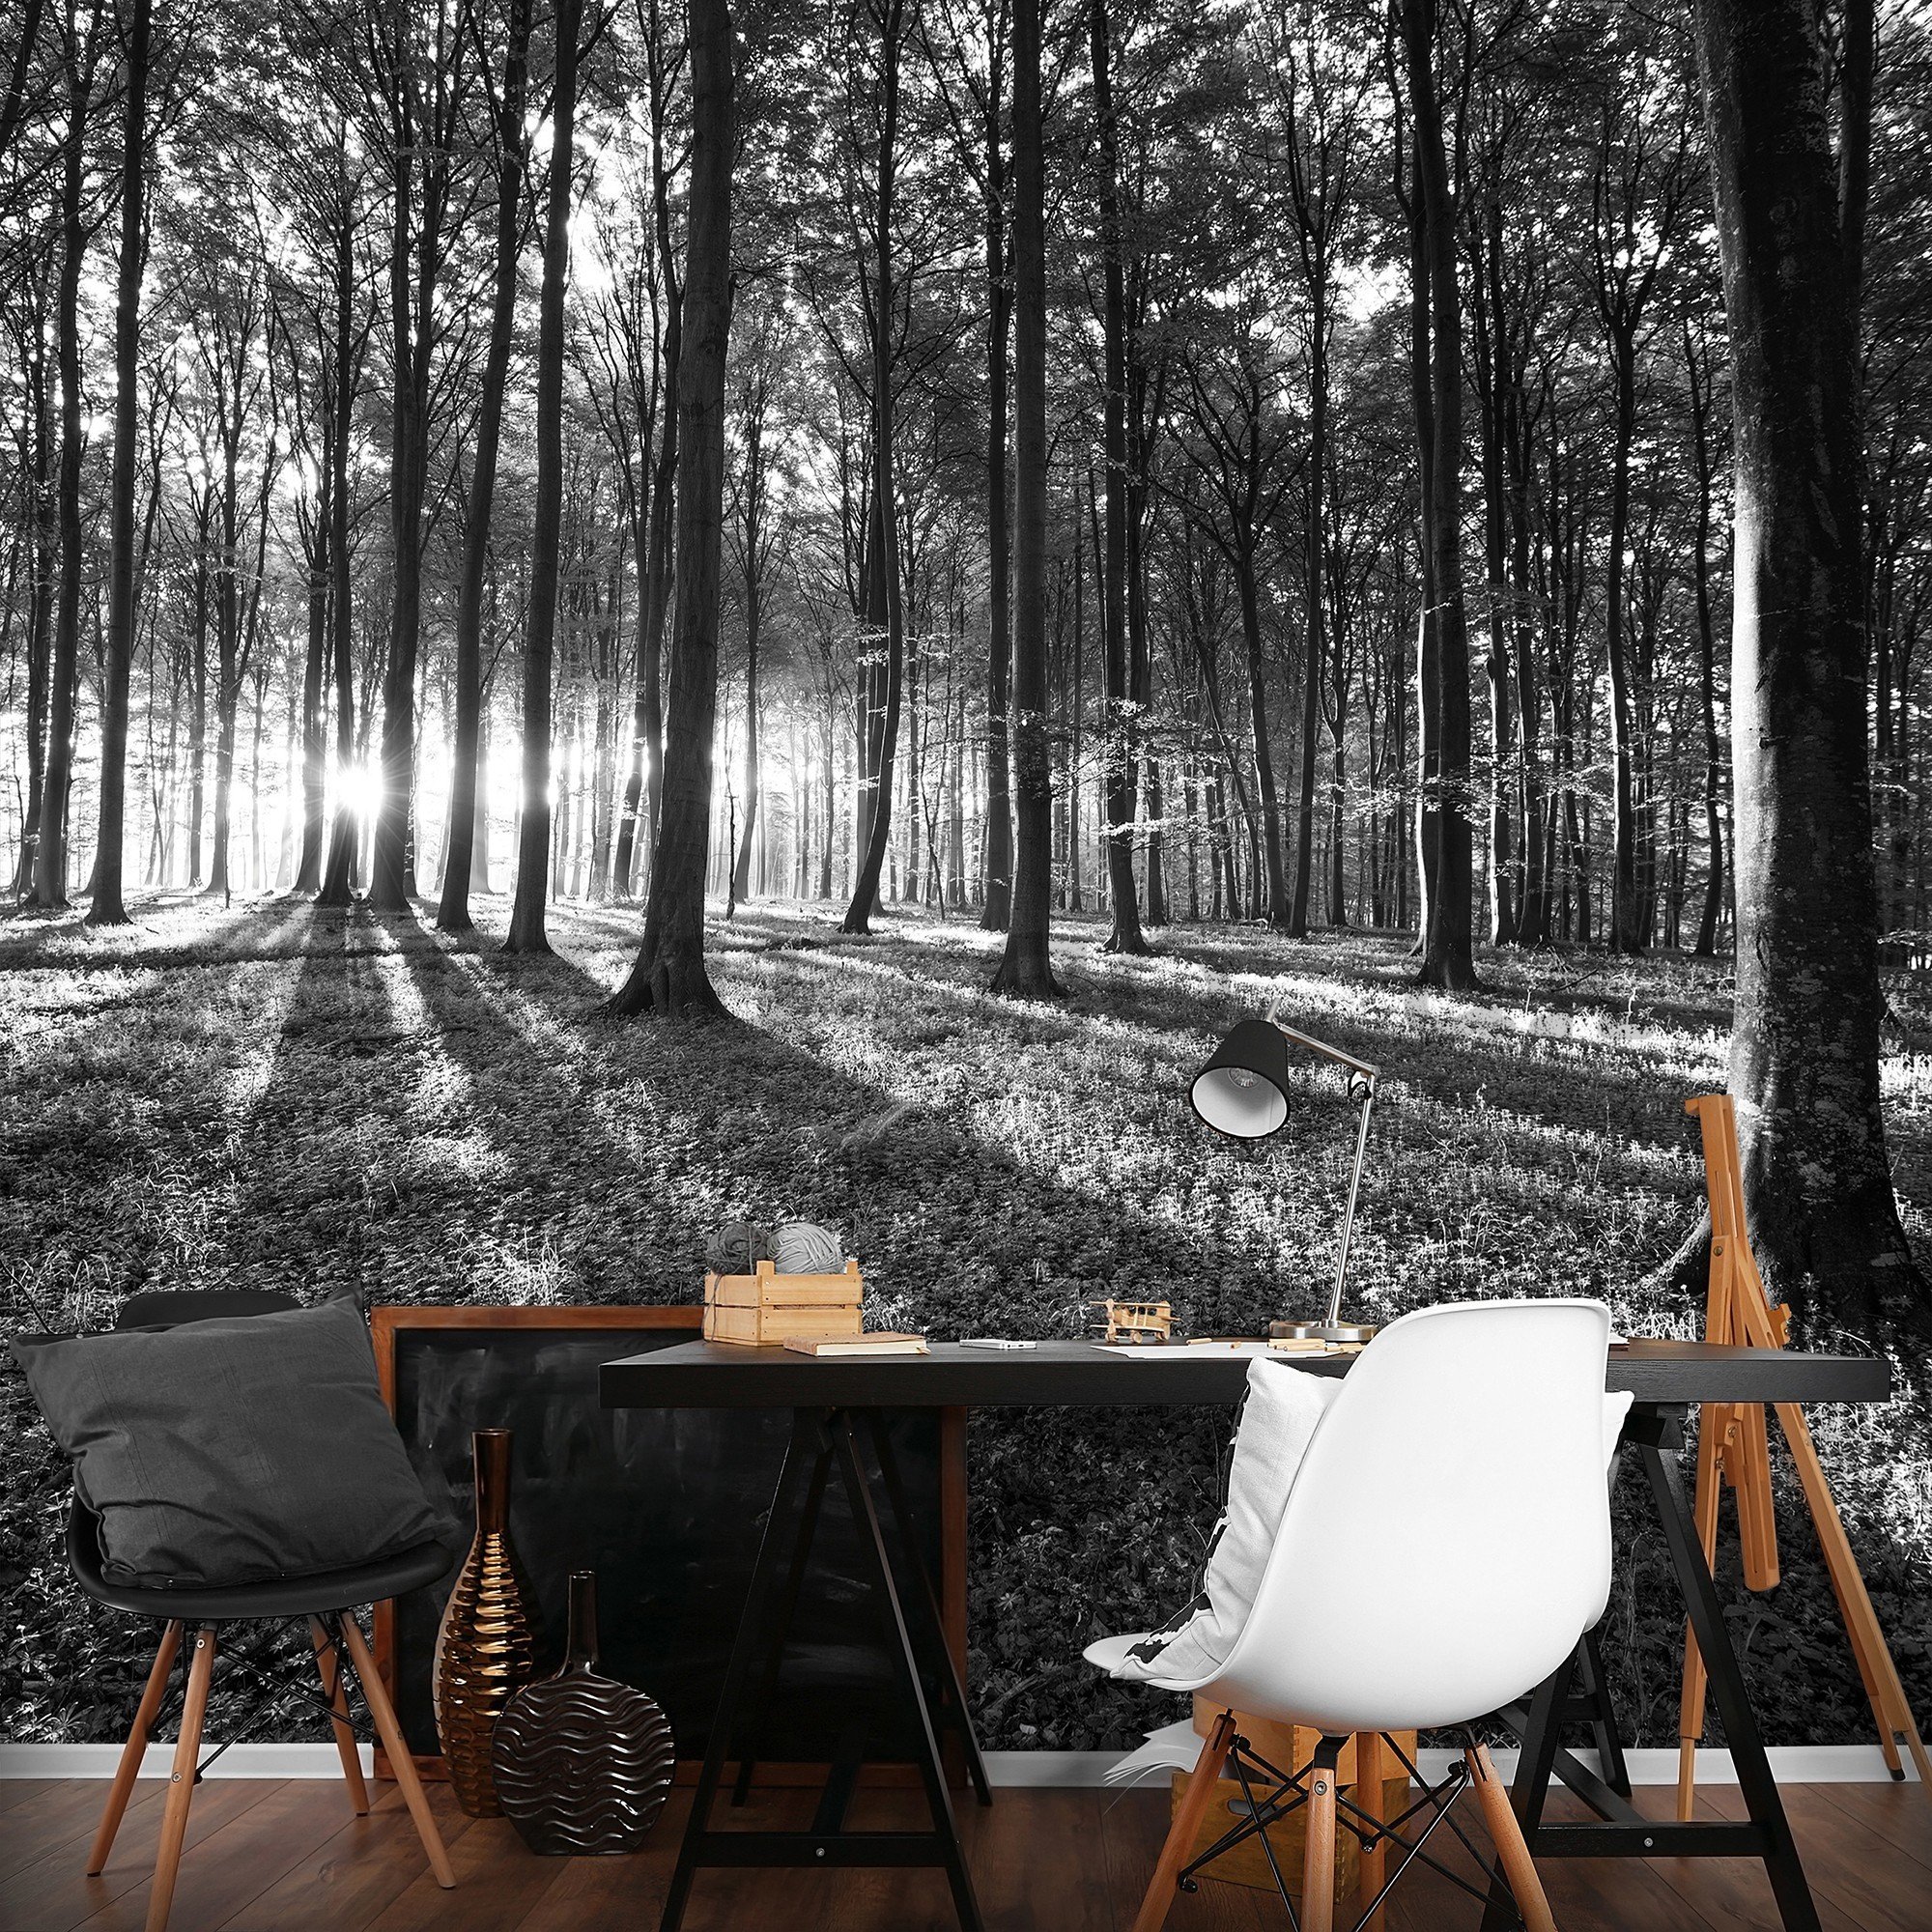 Wall mural vlies: Black and white forest (1) - 416x254 cm